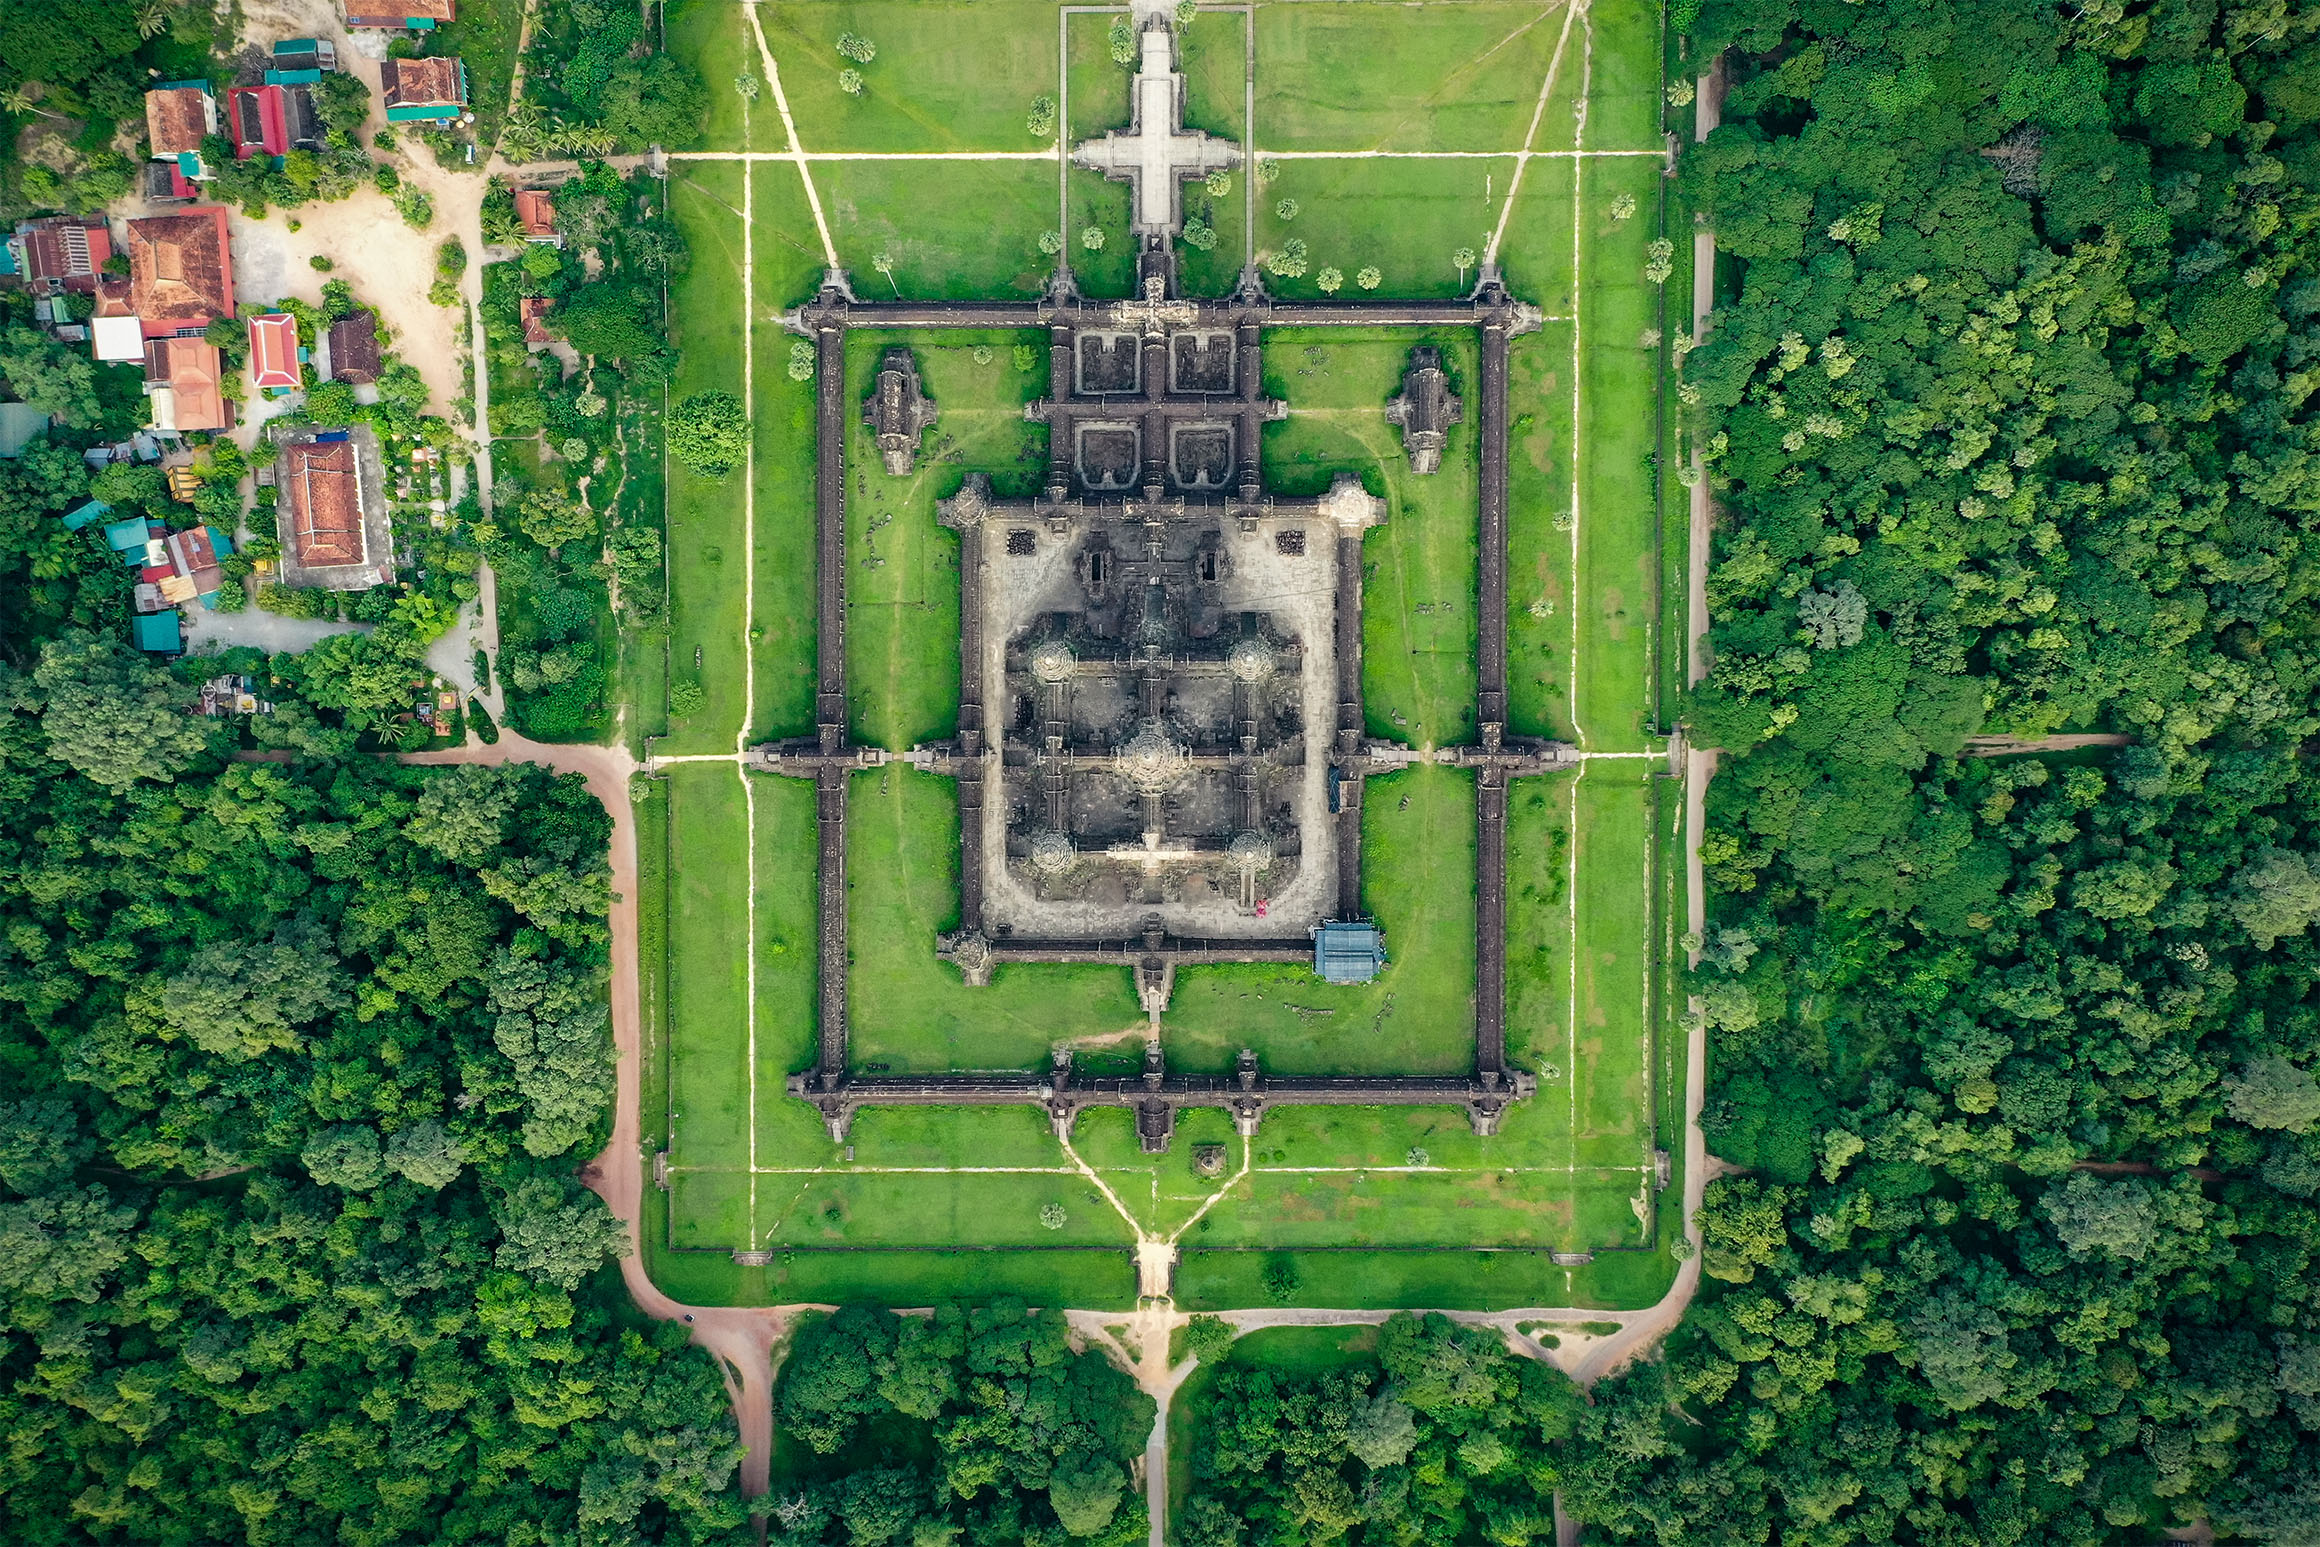 Drone Videographer - View down on Angkor Wat in Siem Reap, Cambodia